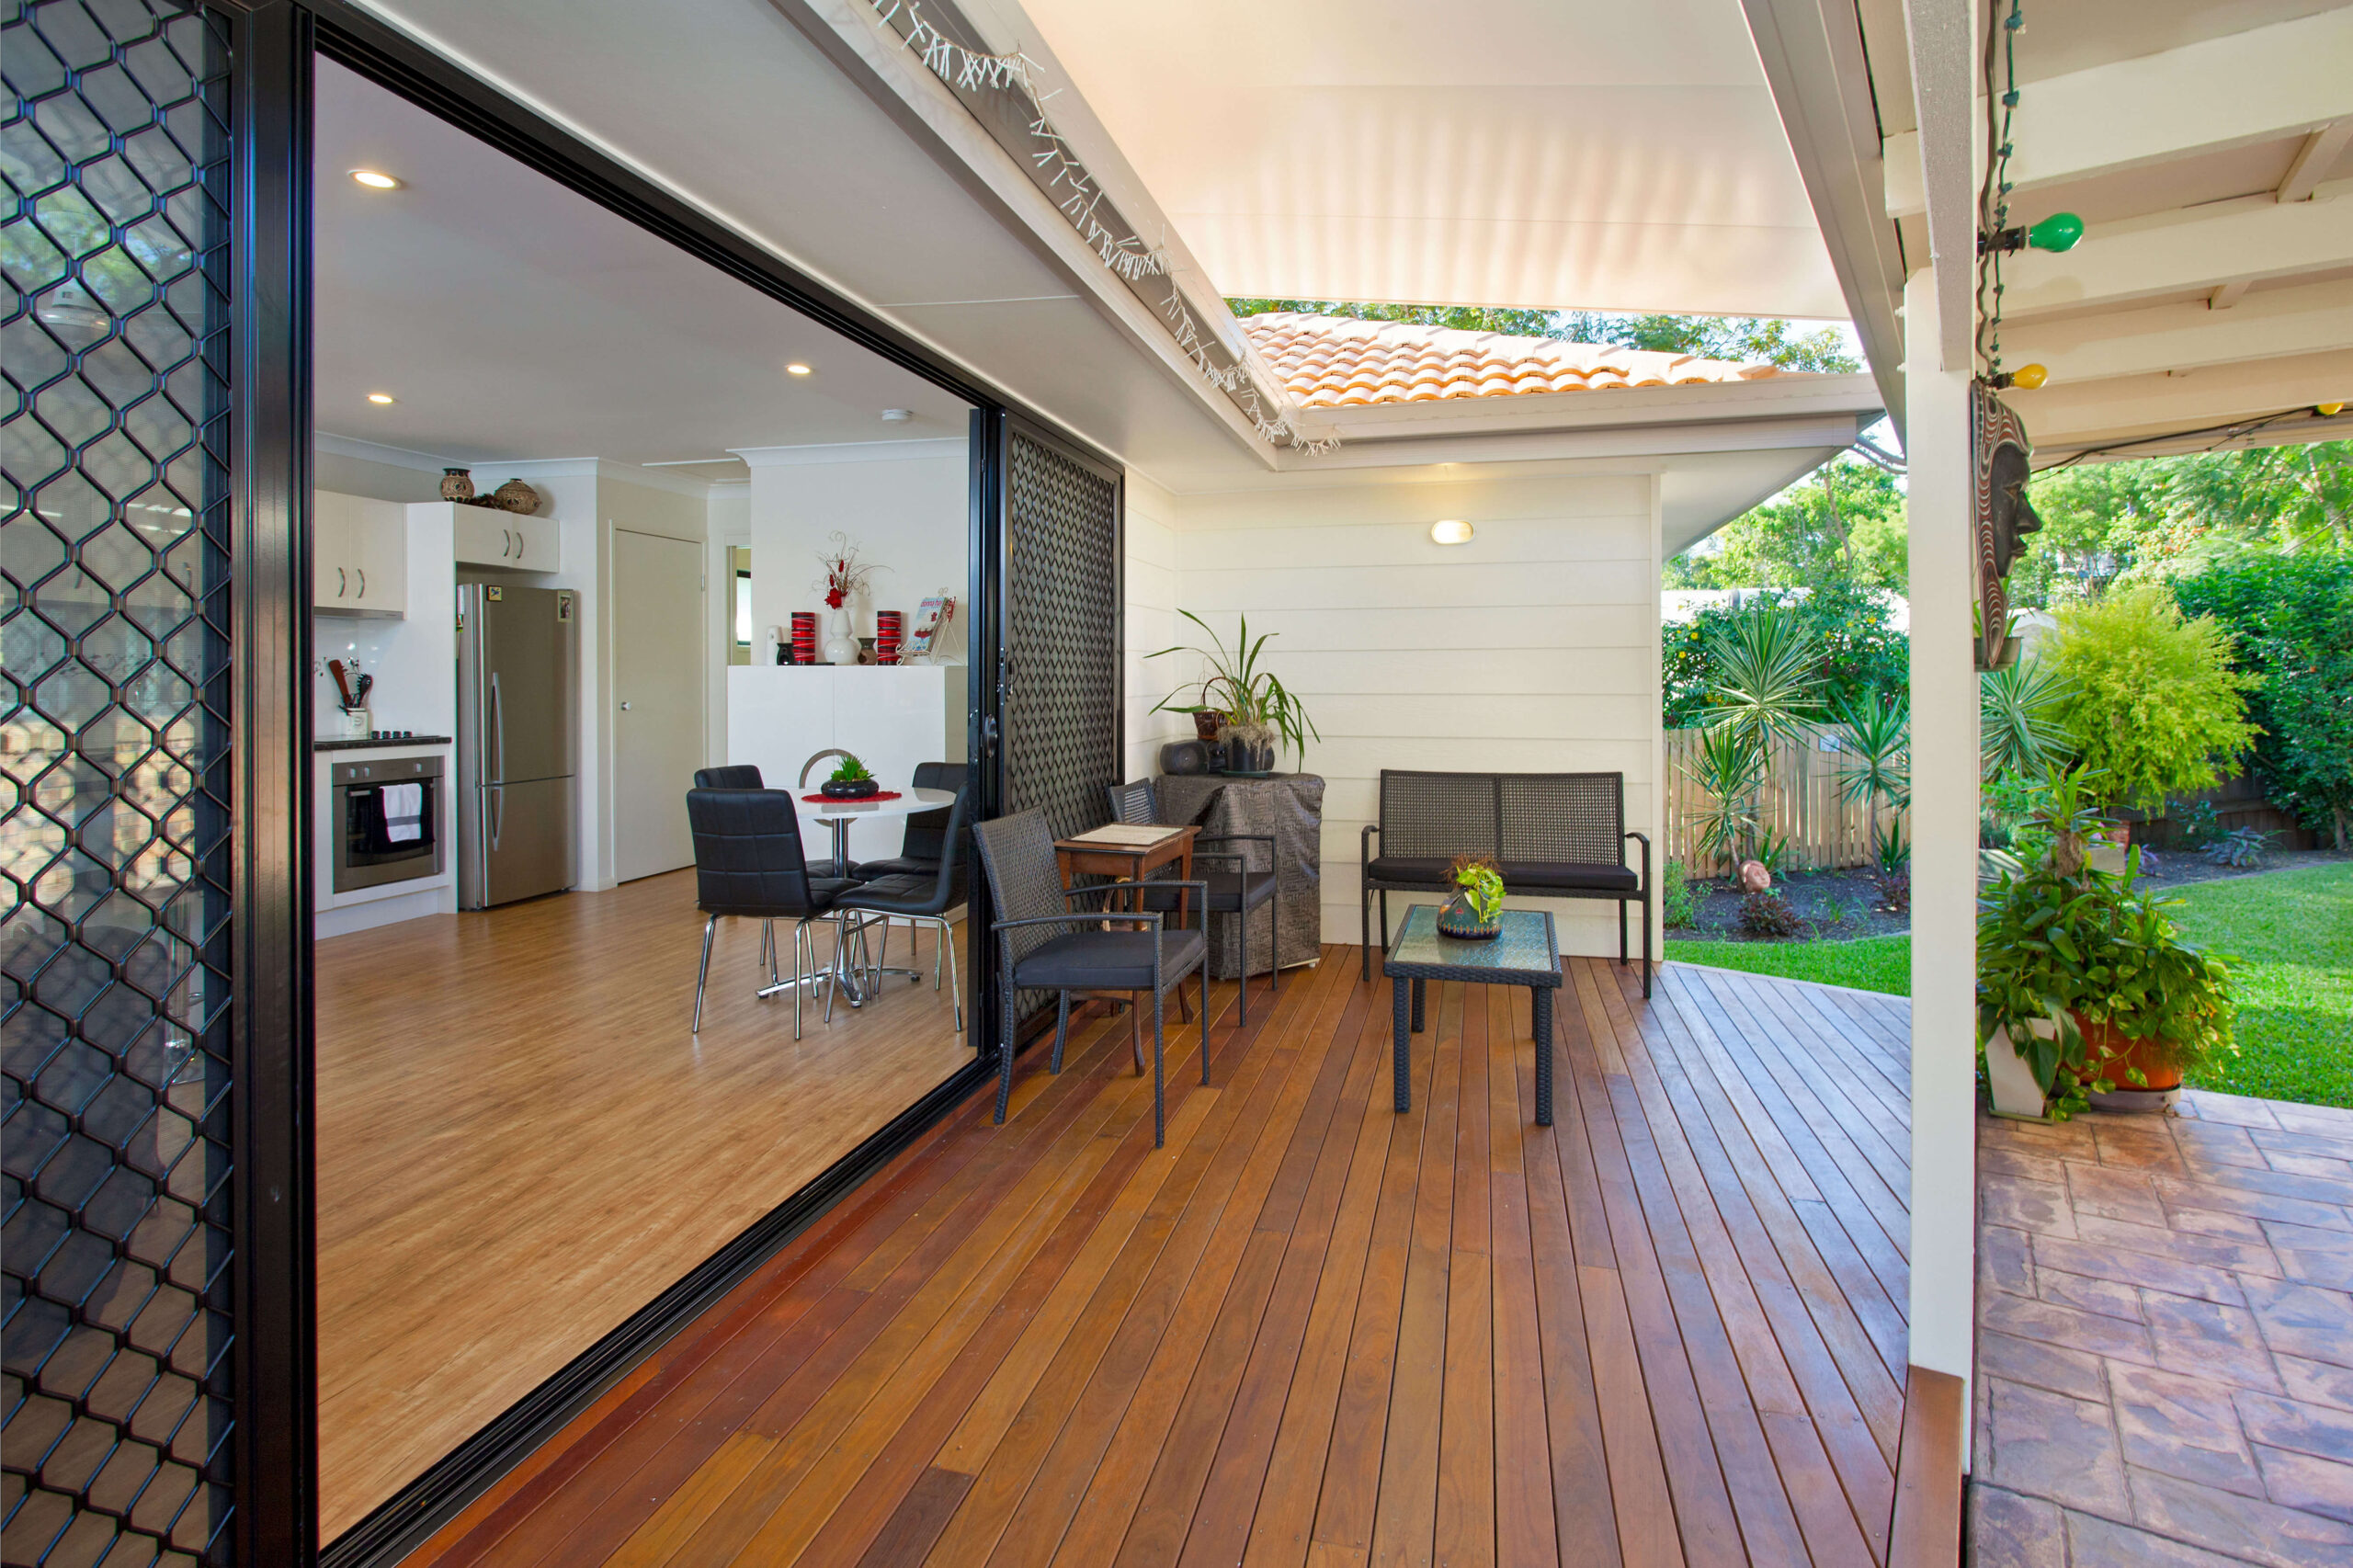 Urban - living area opens out to large deck